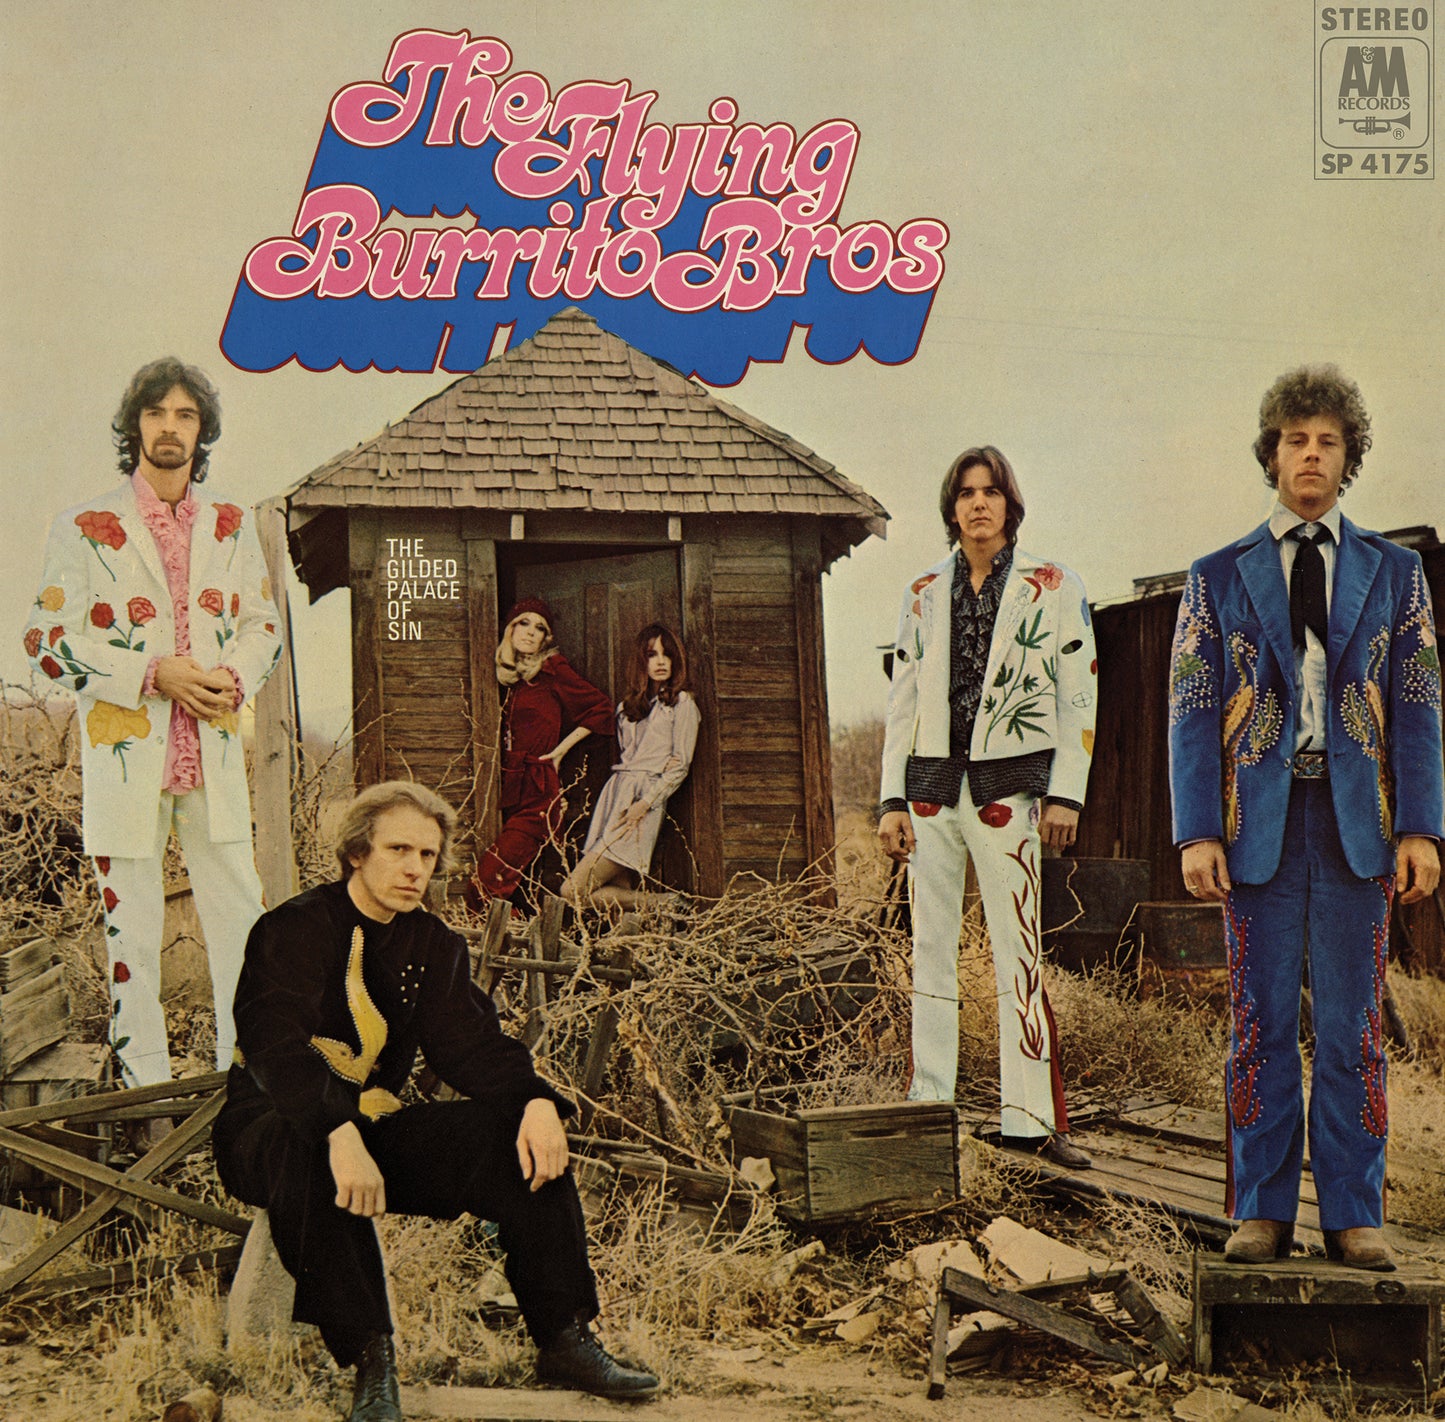 The Flying Burrito Bros. "The Gilded Palace of Sin" CD/SACD (OUT OF STOCK)